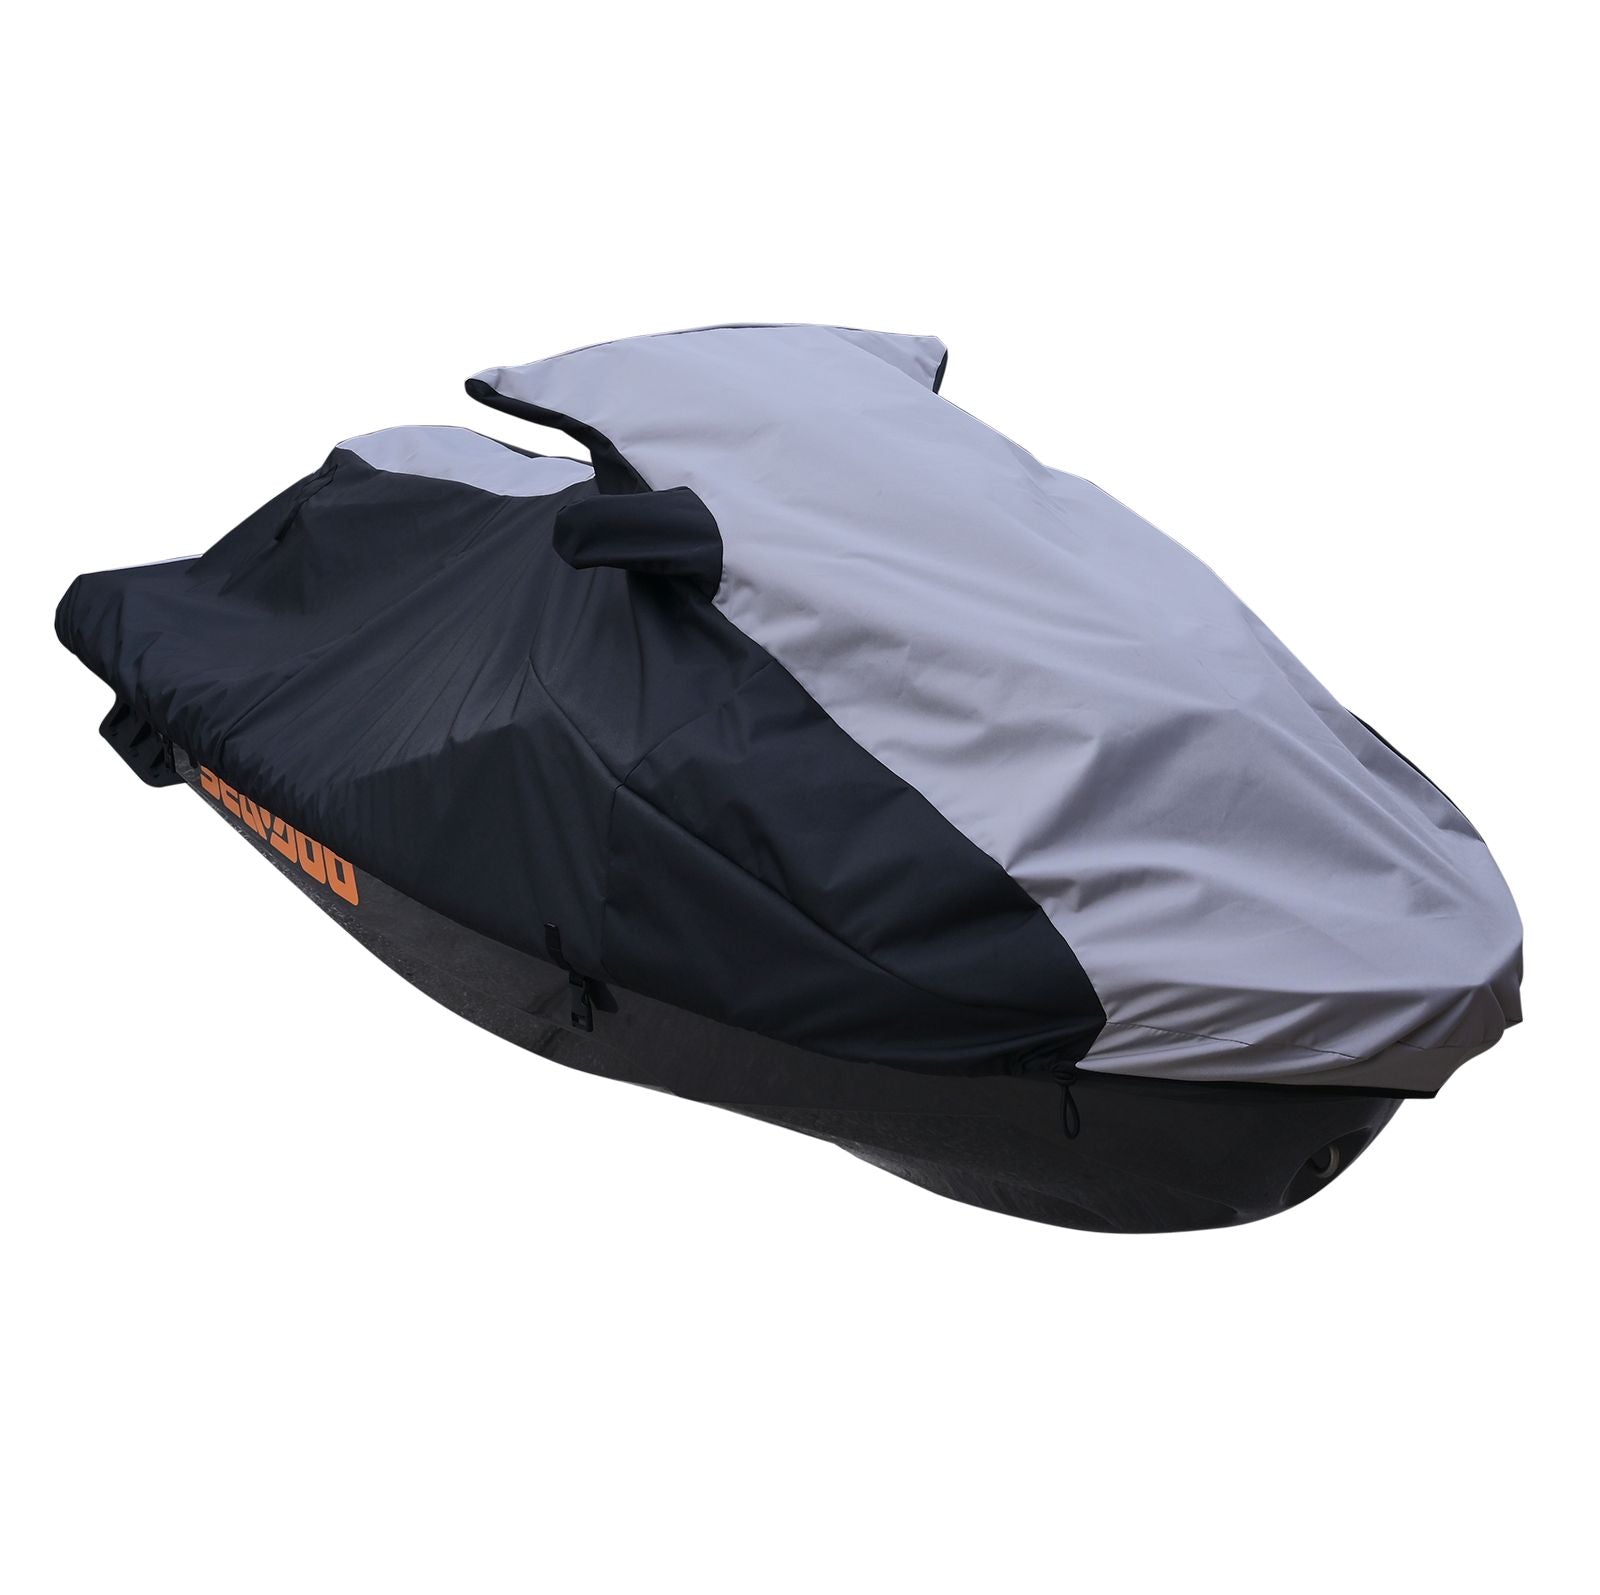 Trailerable Storage cover with vents for Yamaha 2002-2005 FX /2004-2005 FX HO